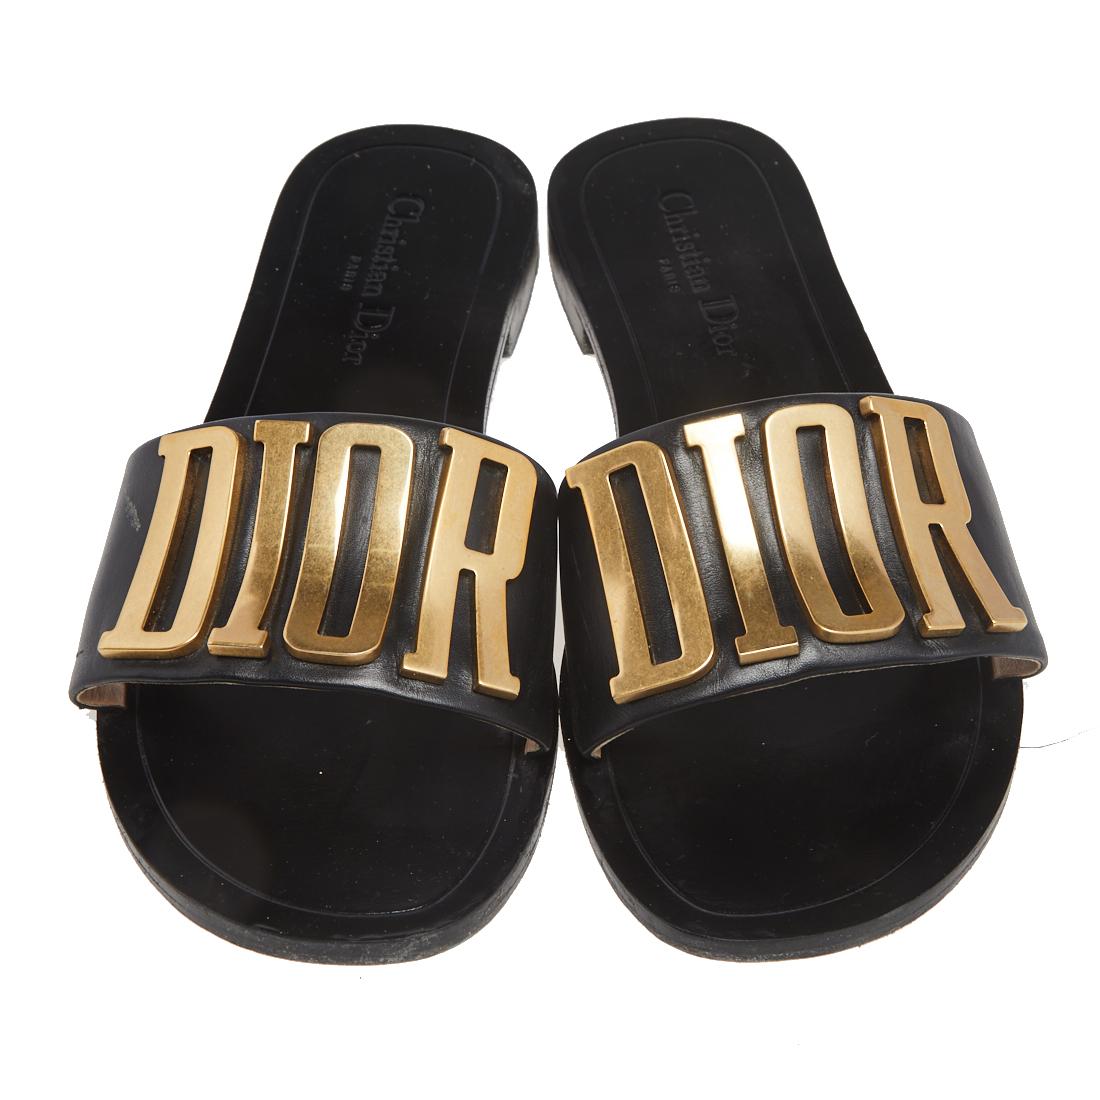 These sandals by Dior are trendy and easy to slip on. Made in Italy, they feature gorgeous black uppers that carry the famous brand name in gold-tone metal. They are fashioned from luxurious black leather and set on low heels. Just slip them on and